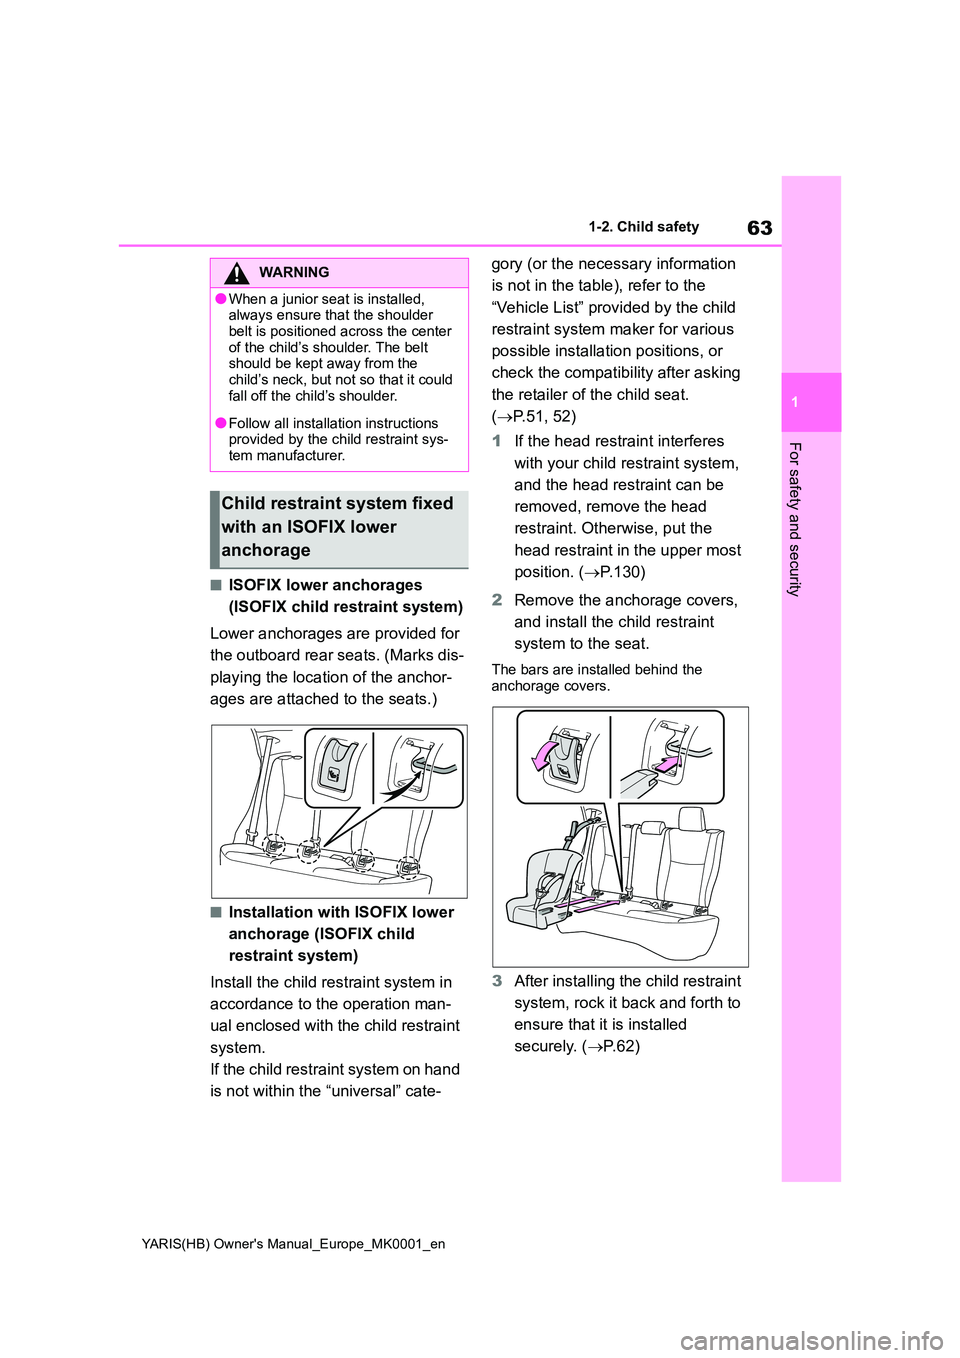 TOYOTA YARIS 2021 Owners Manual 63
1
YARIS(HB) Owners Manual_Europe_MK0001_en
1-2. Child safety
For safety and security
■ISOFIX lower anchorages  
(ISOFIX child restraint system) 
Lower anchorages are provided for  
the outboard 